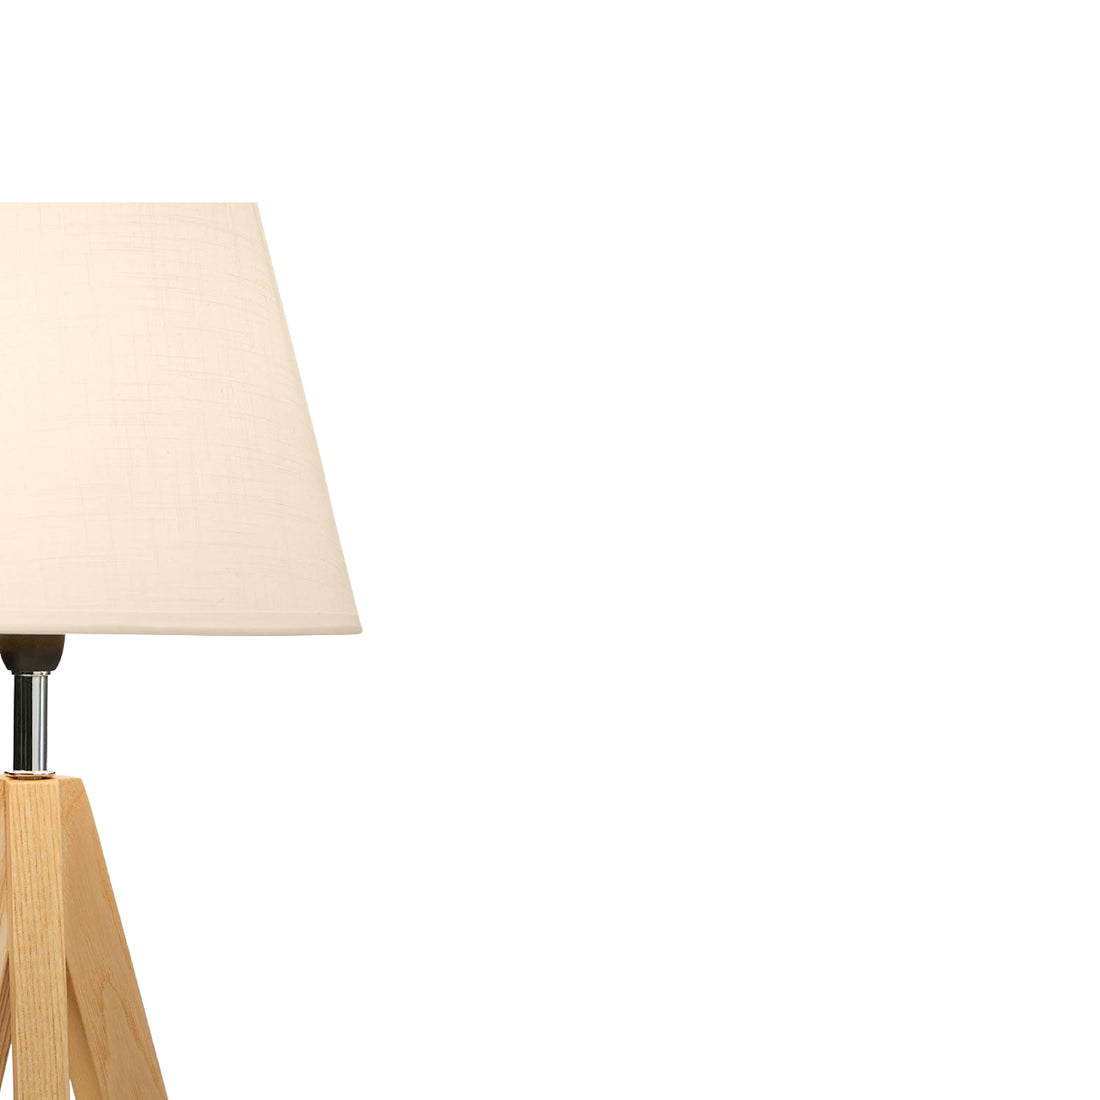 Wooden Table Lamp WIth Shade